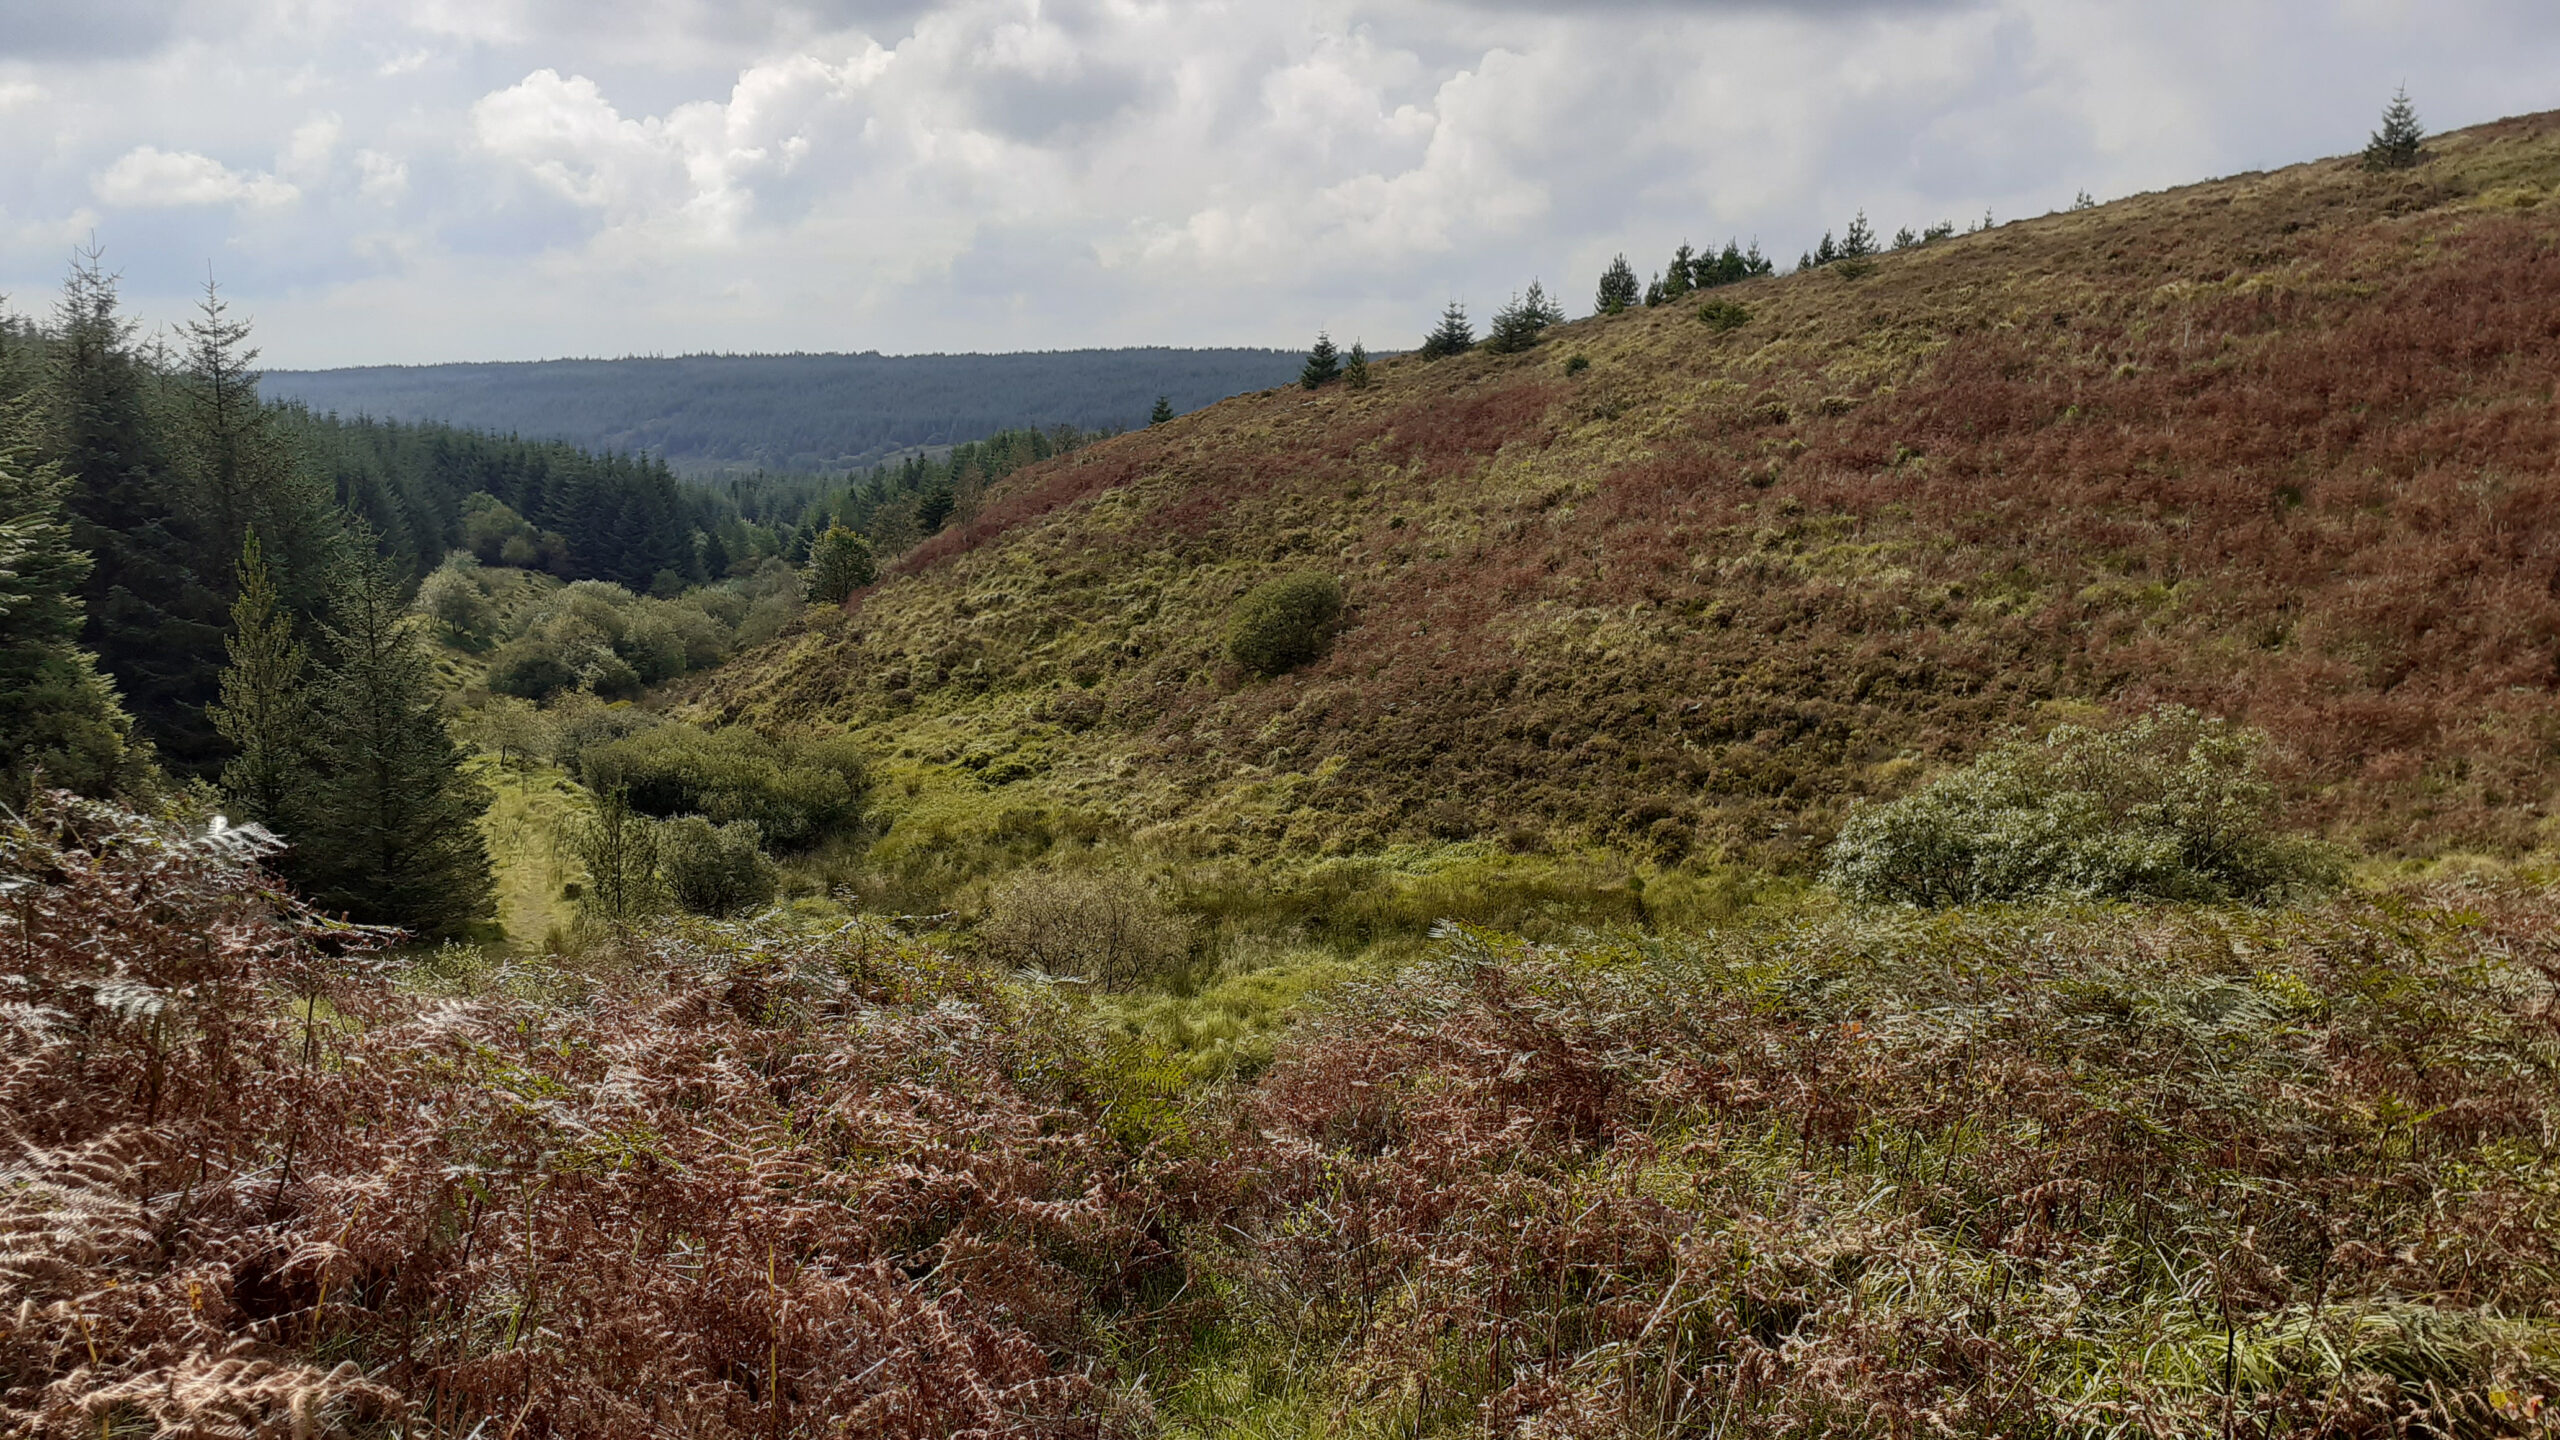 [wpml-string context="slieve" name="title2"]SLIEVE BLOOM MOUNTAINS NATURE RESERVE[/wpml-string]